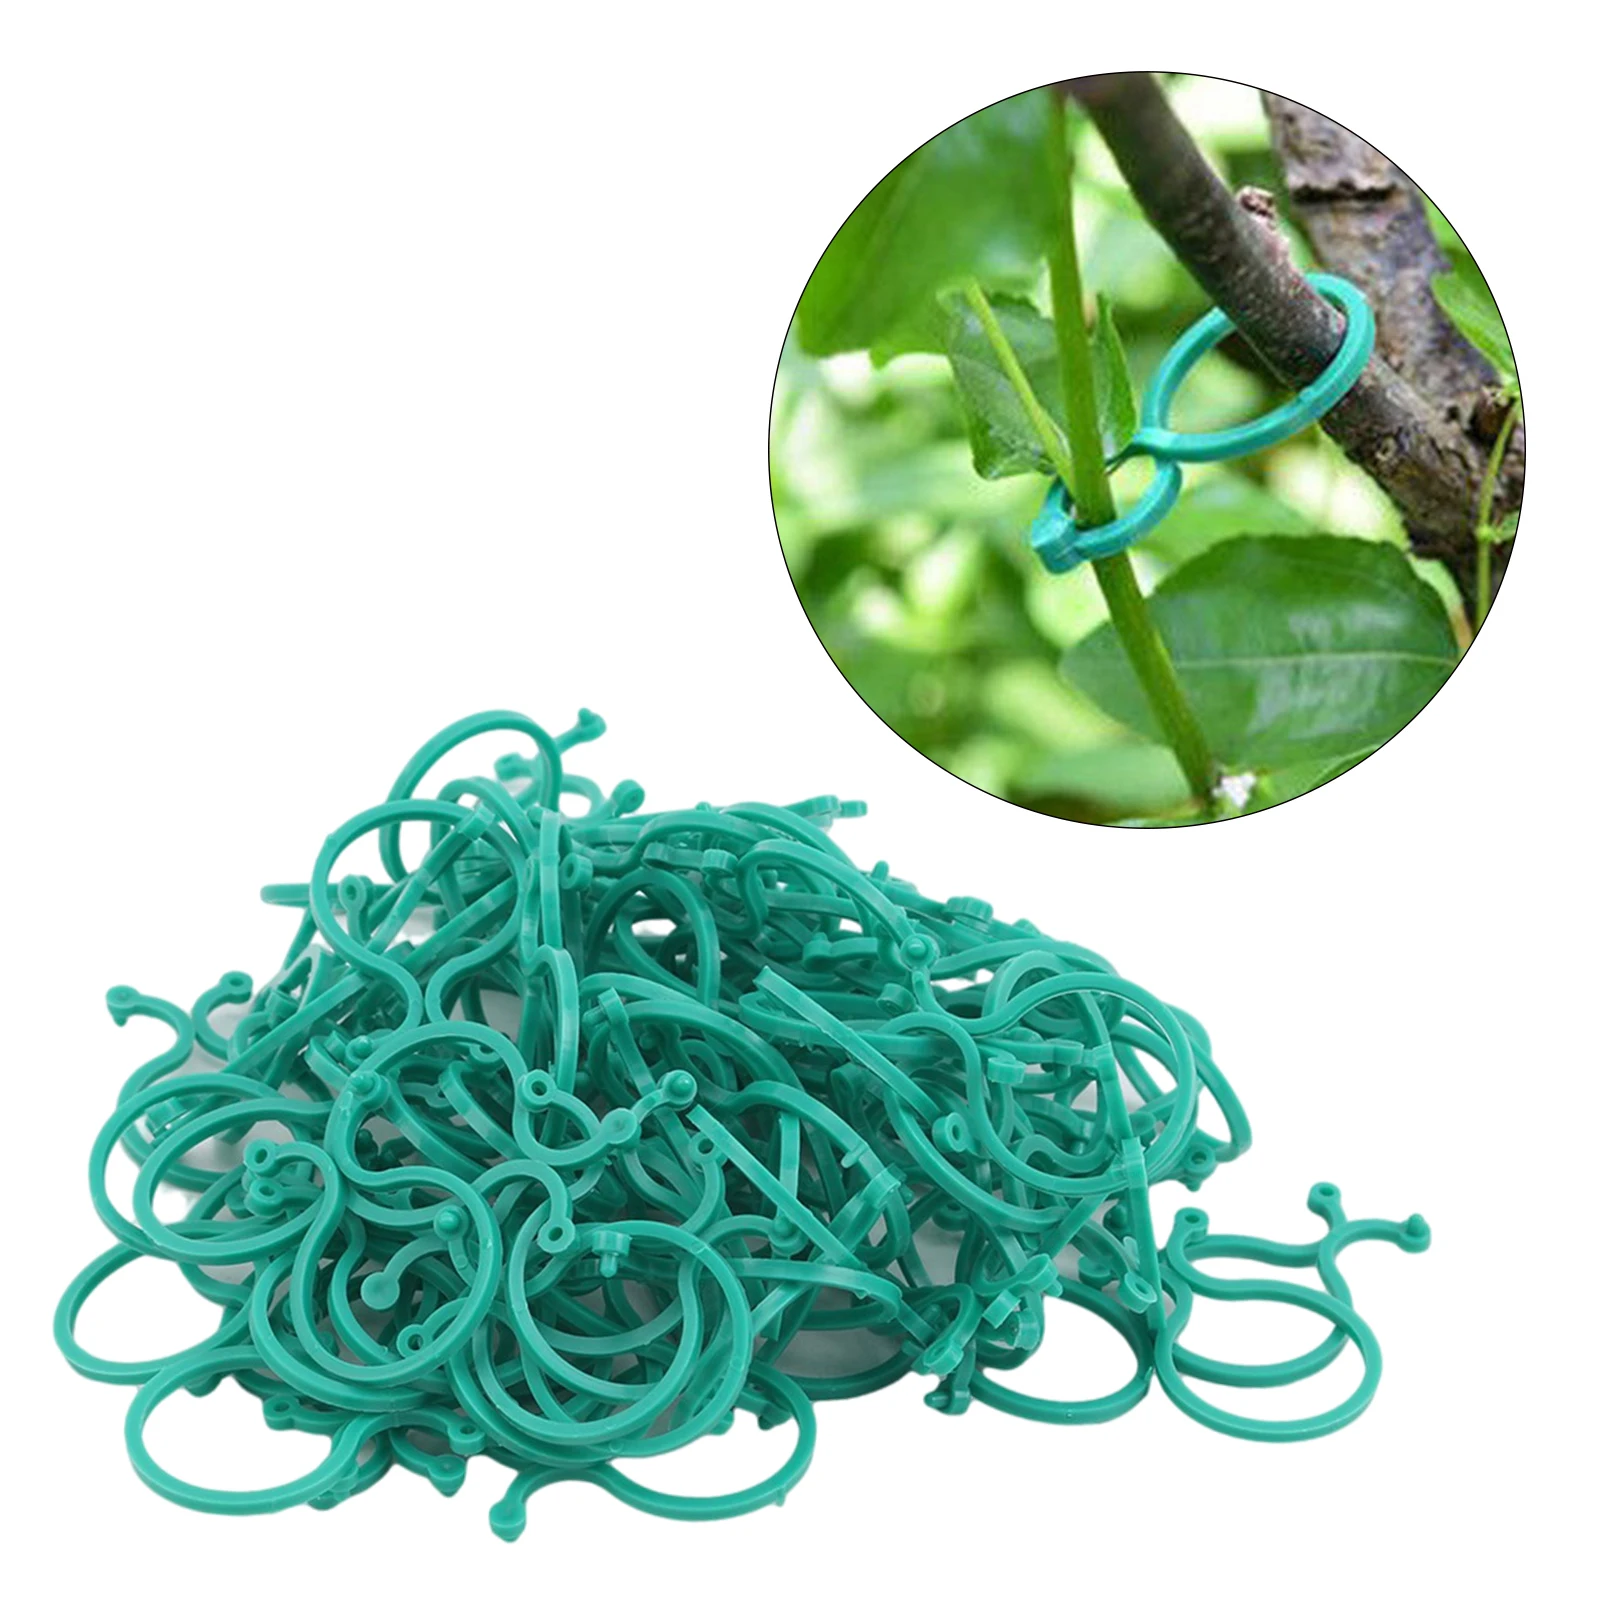 100pcs Plastic Plant Clips Supports Connects Reusable Protection Grafting Fixing Tool Gardening Supplies for Vegetable Tomato